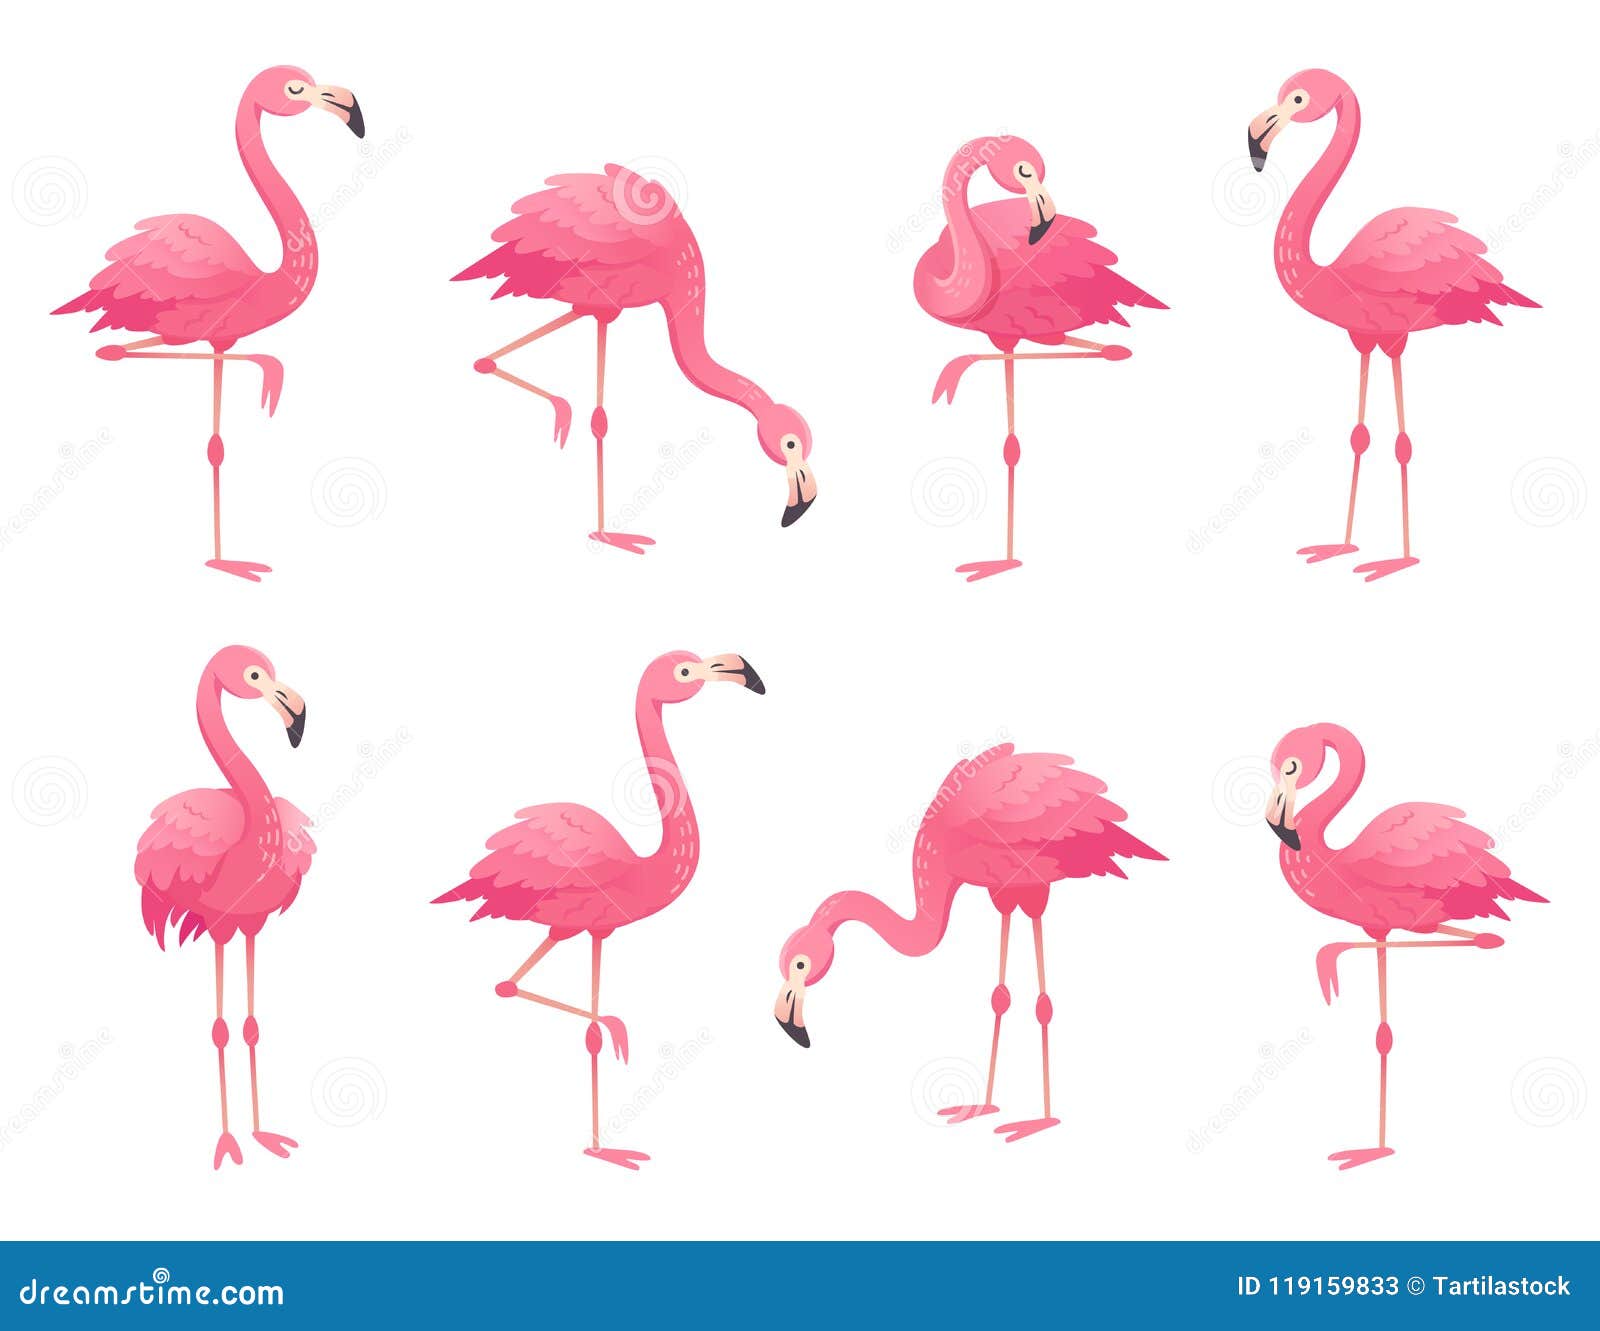 exotic pink flamingos birds. flamingo with rose feathers stand on one leg. rosy plumage flam bird cartoon 